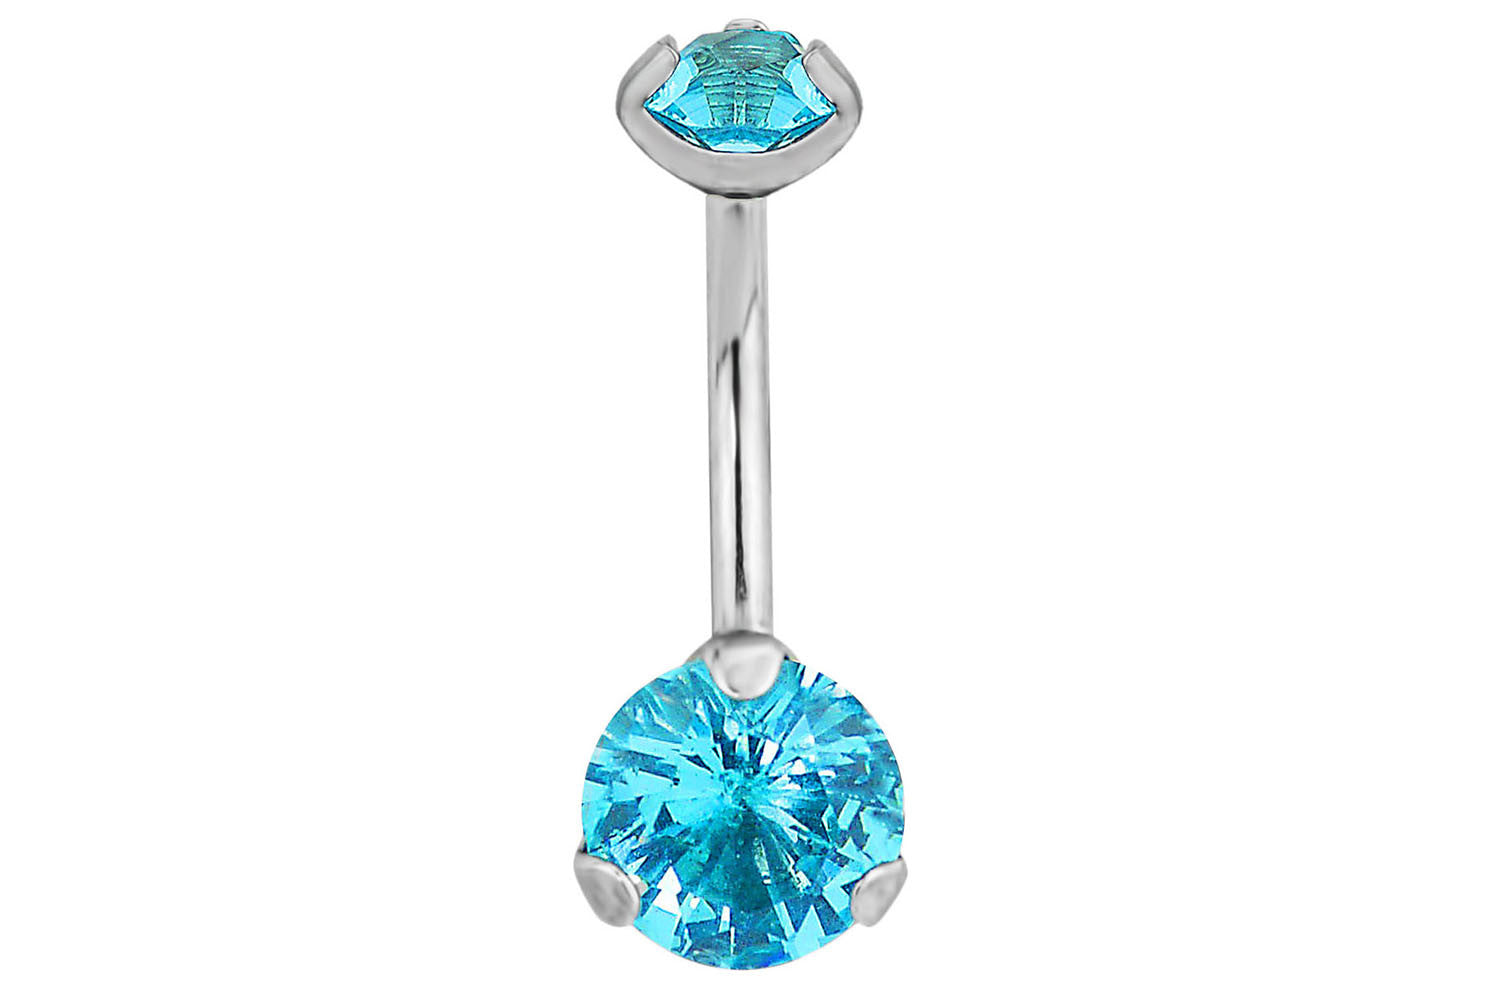 2.5 Ct Solitaire Aqua Belly Ring